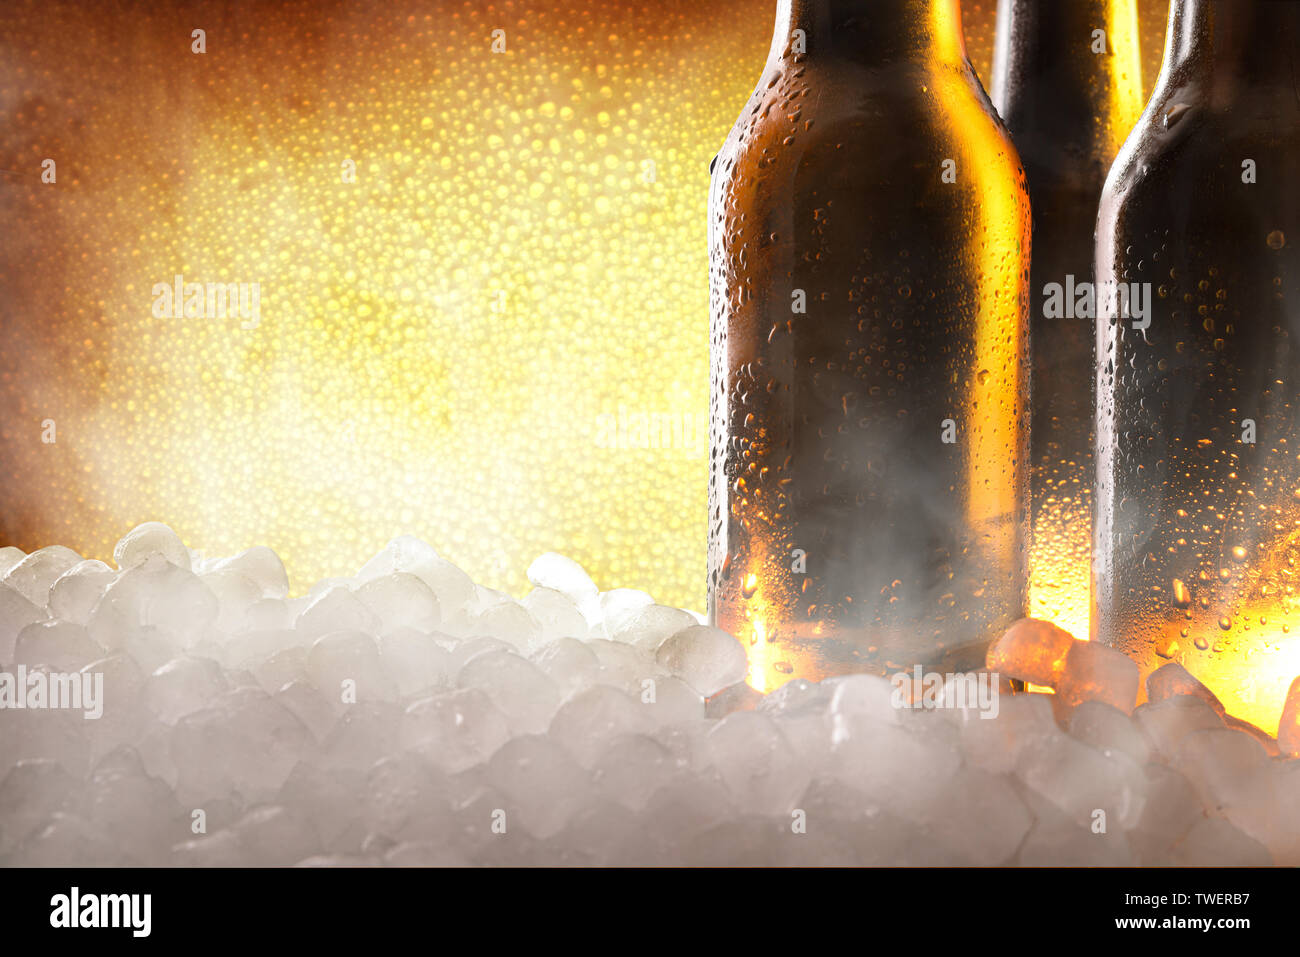 https://c8.alamy.com/comp/TWERB7/three-full-beer-bottles-on-crushed-ice-and-golden-background-close-up-horizontal-composition-front-view-TWERB7.jpg